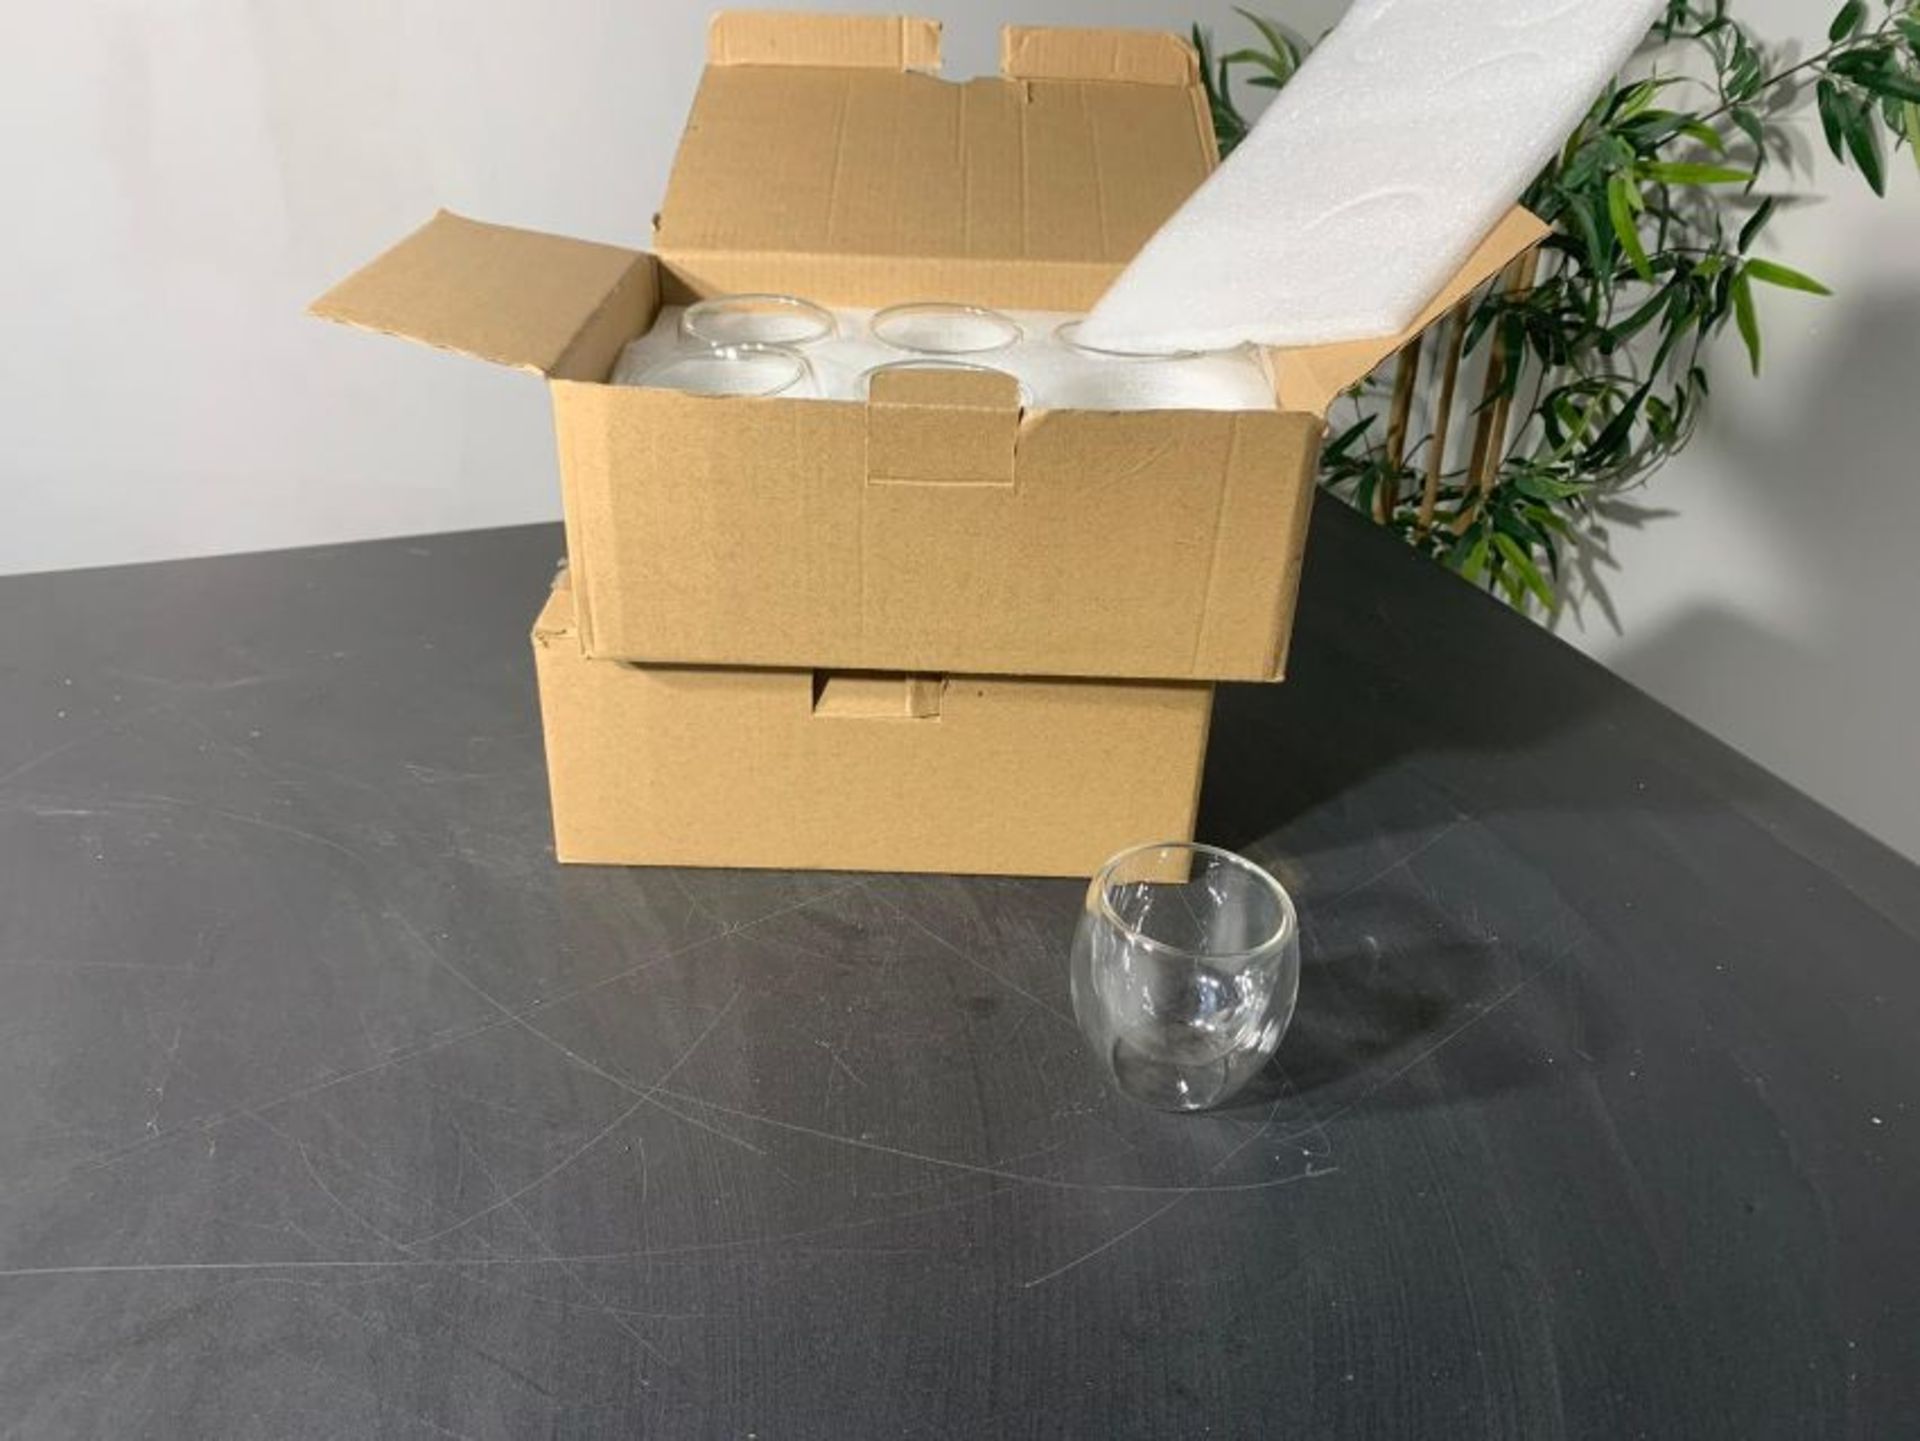 Glass Candle Holders 6 per box. 2 boxes per lot